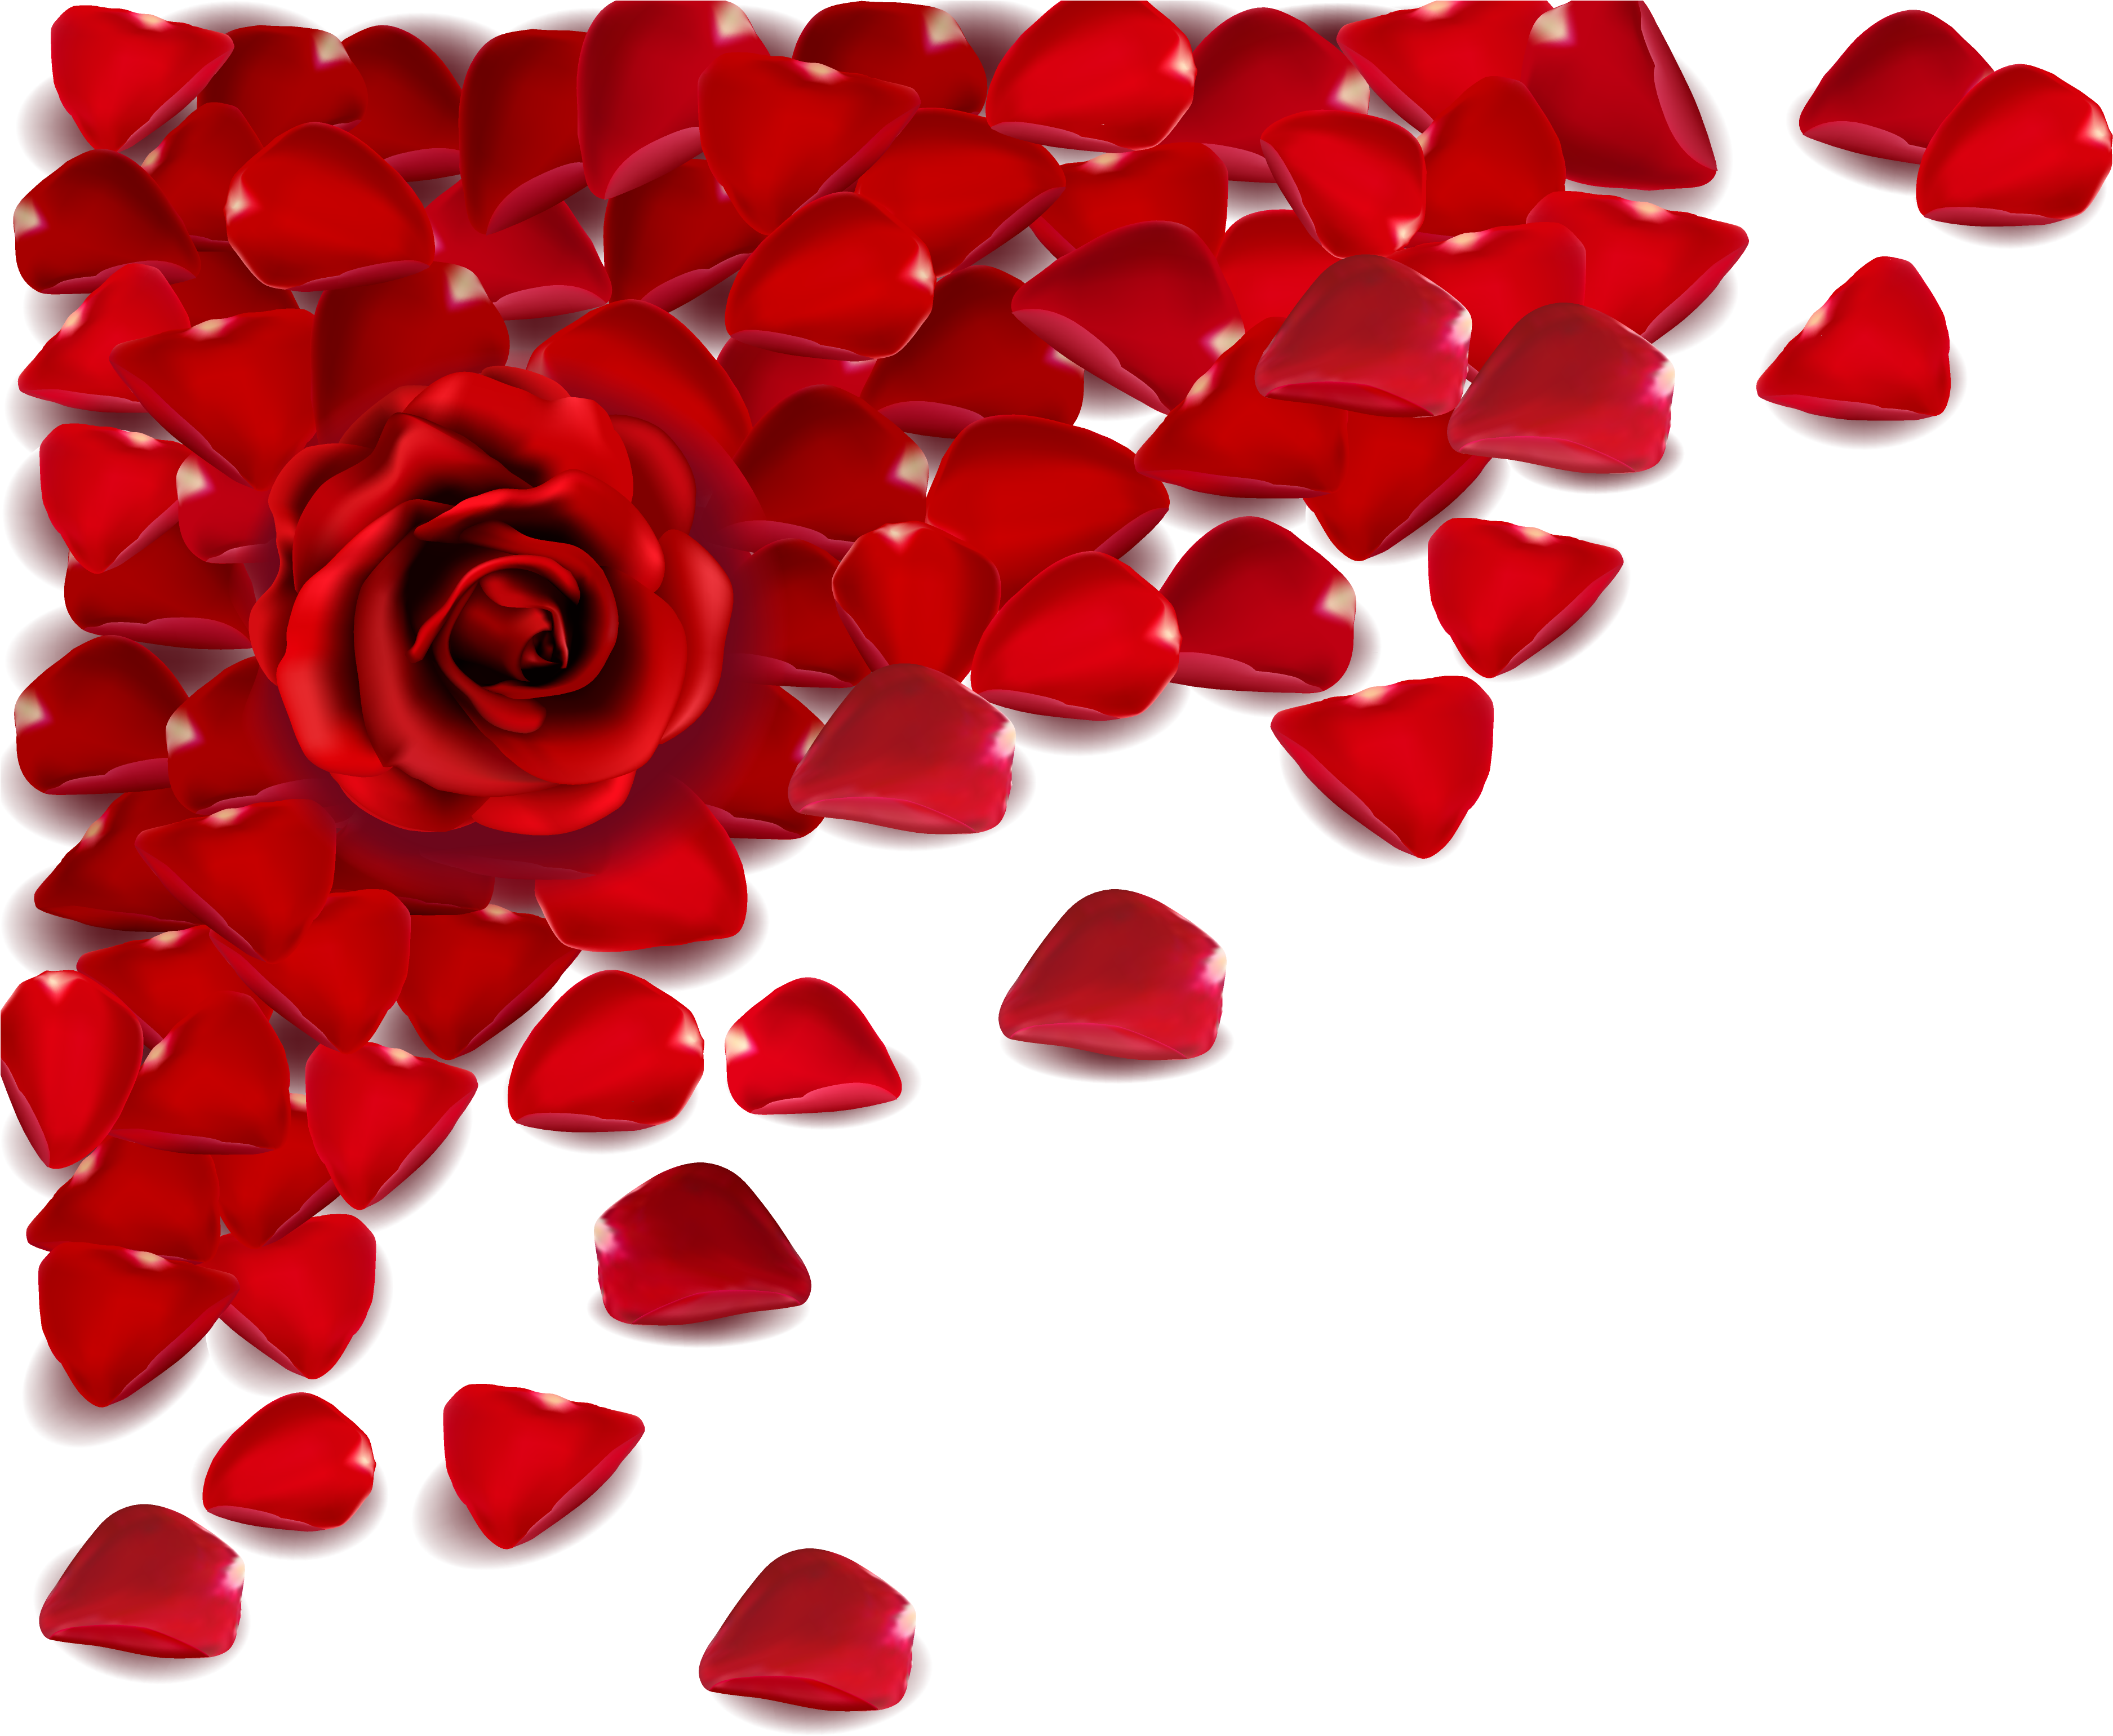 Love Valentine's Day Propose Day Romance Girlfriend - Background Designs For Flowers (3840x3184)